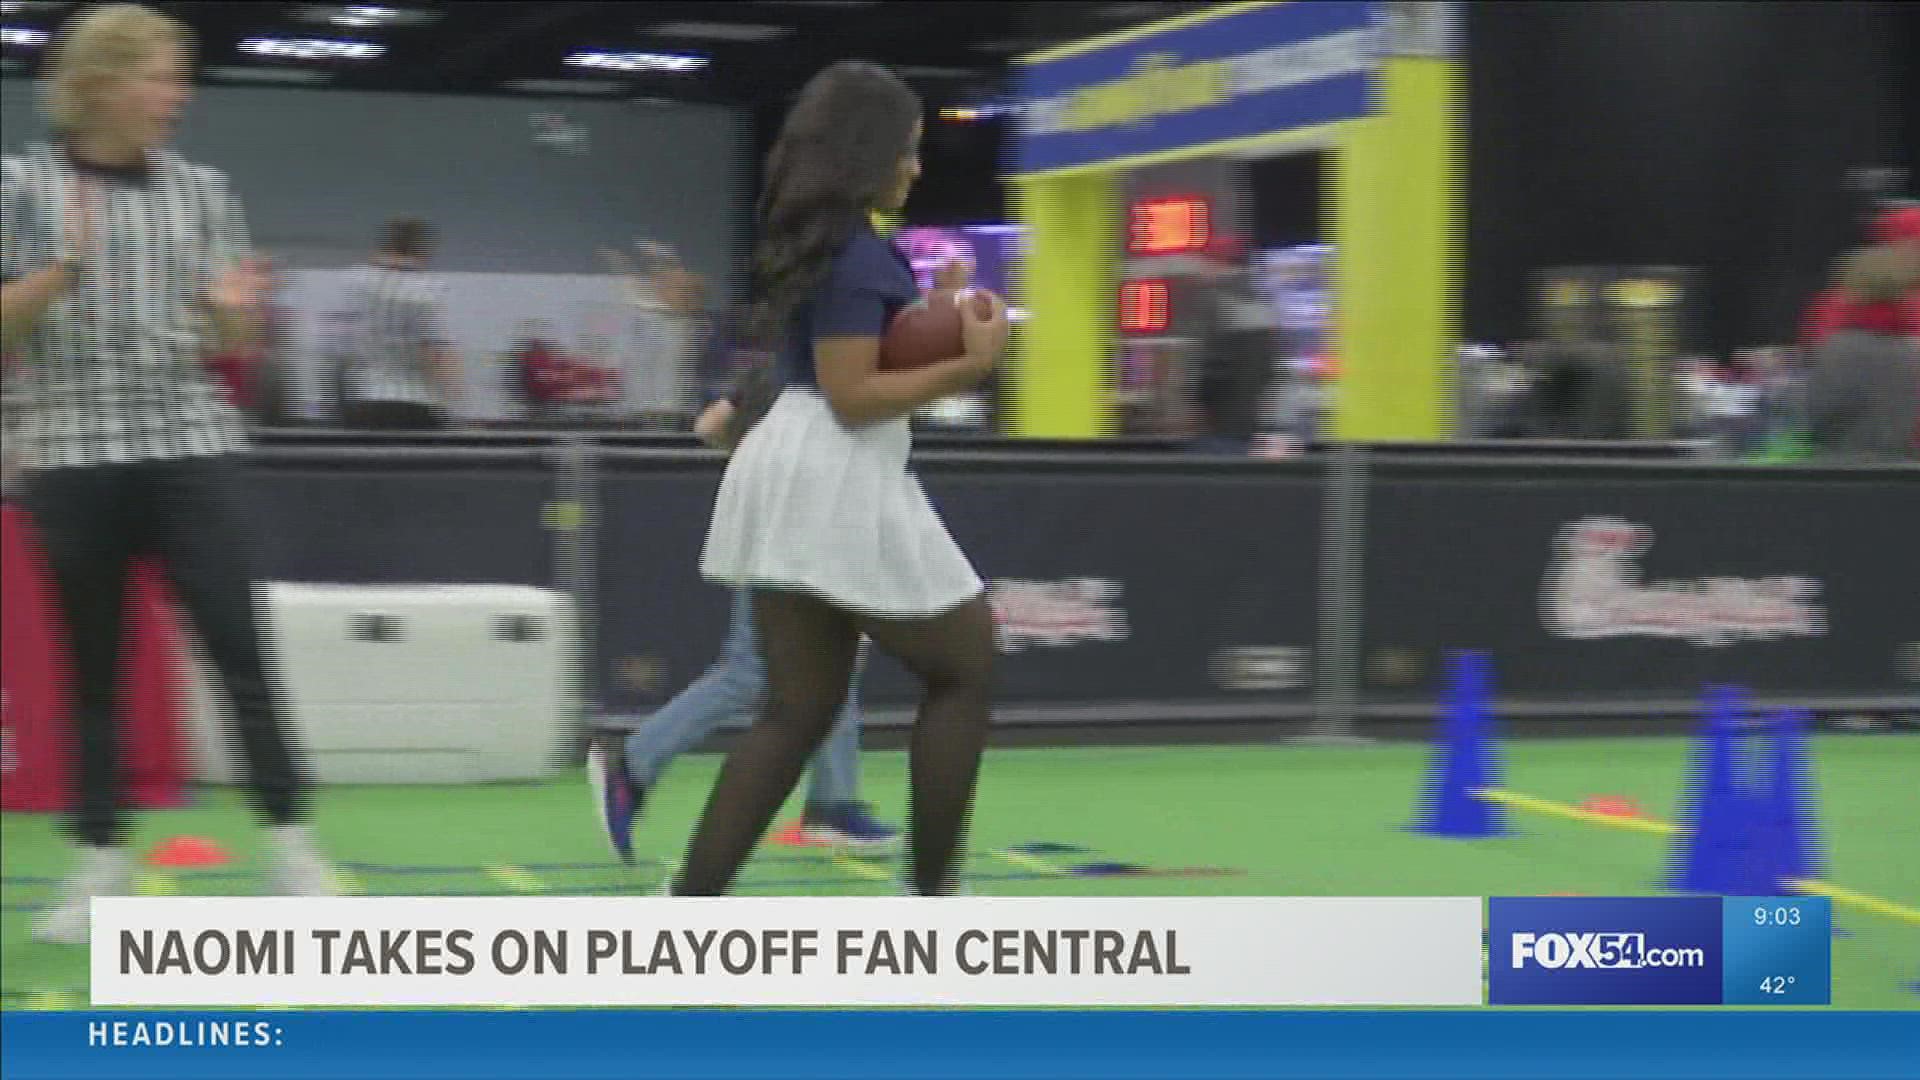 Naomi Grey takes on Fan Central in Indianapolis before the Alabama/Georgia National Championship Game.